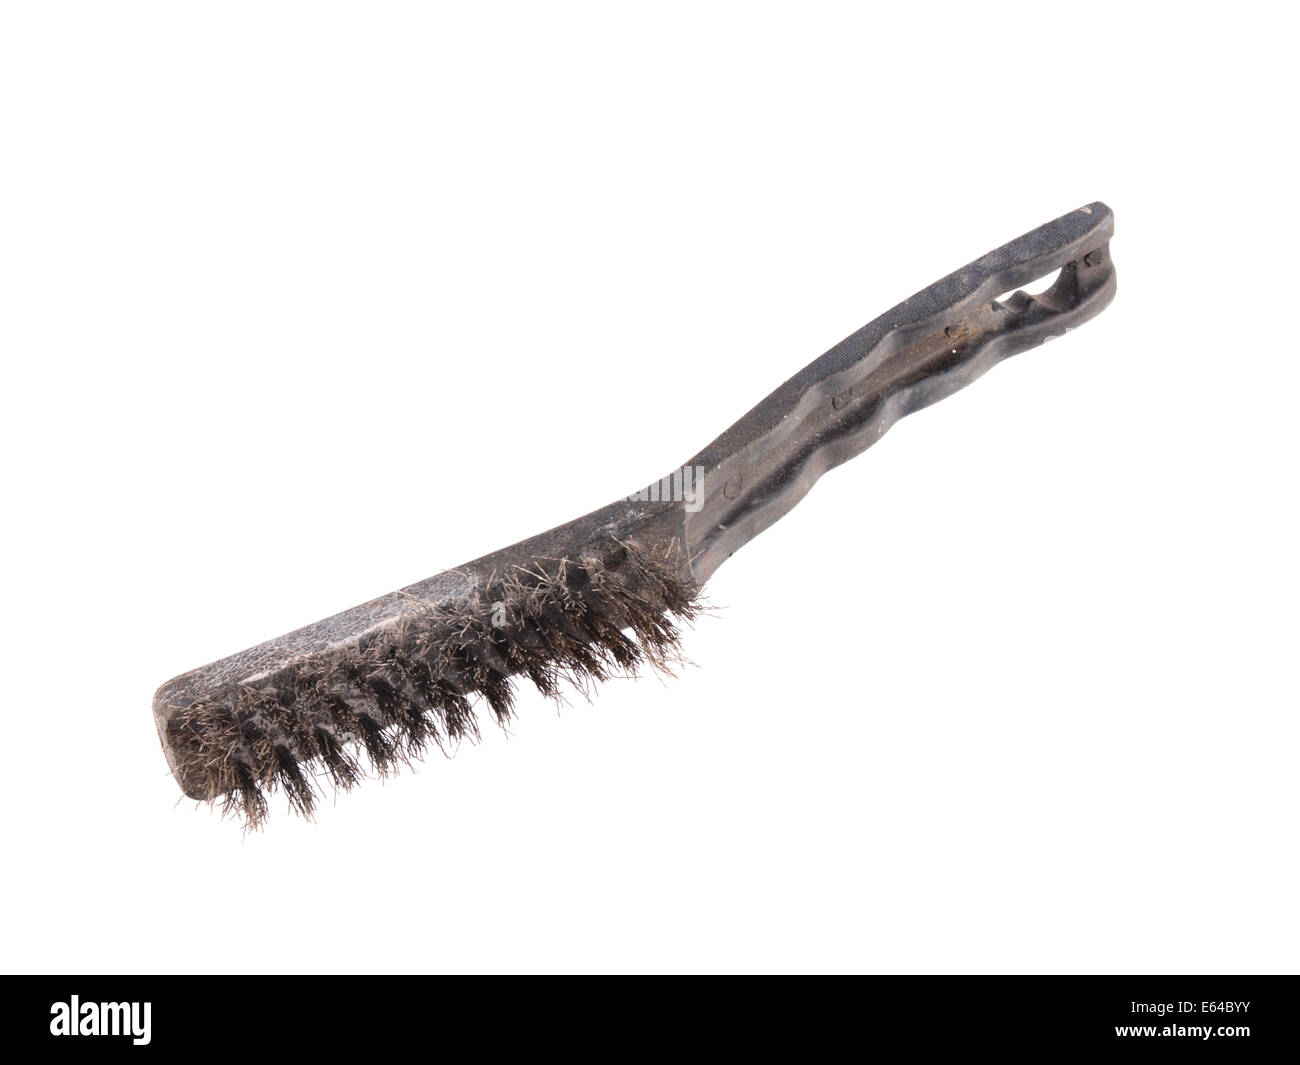 Close up photo of a wire brush on a plain white background. Stock Photo